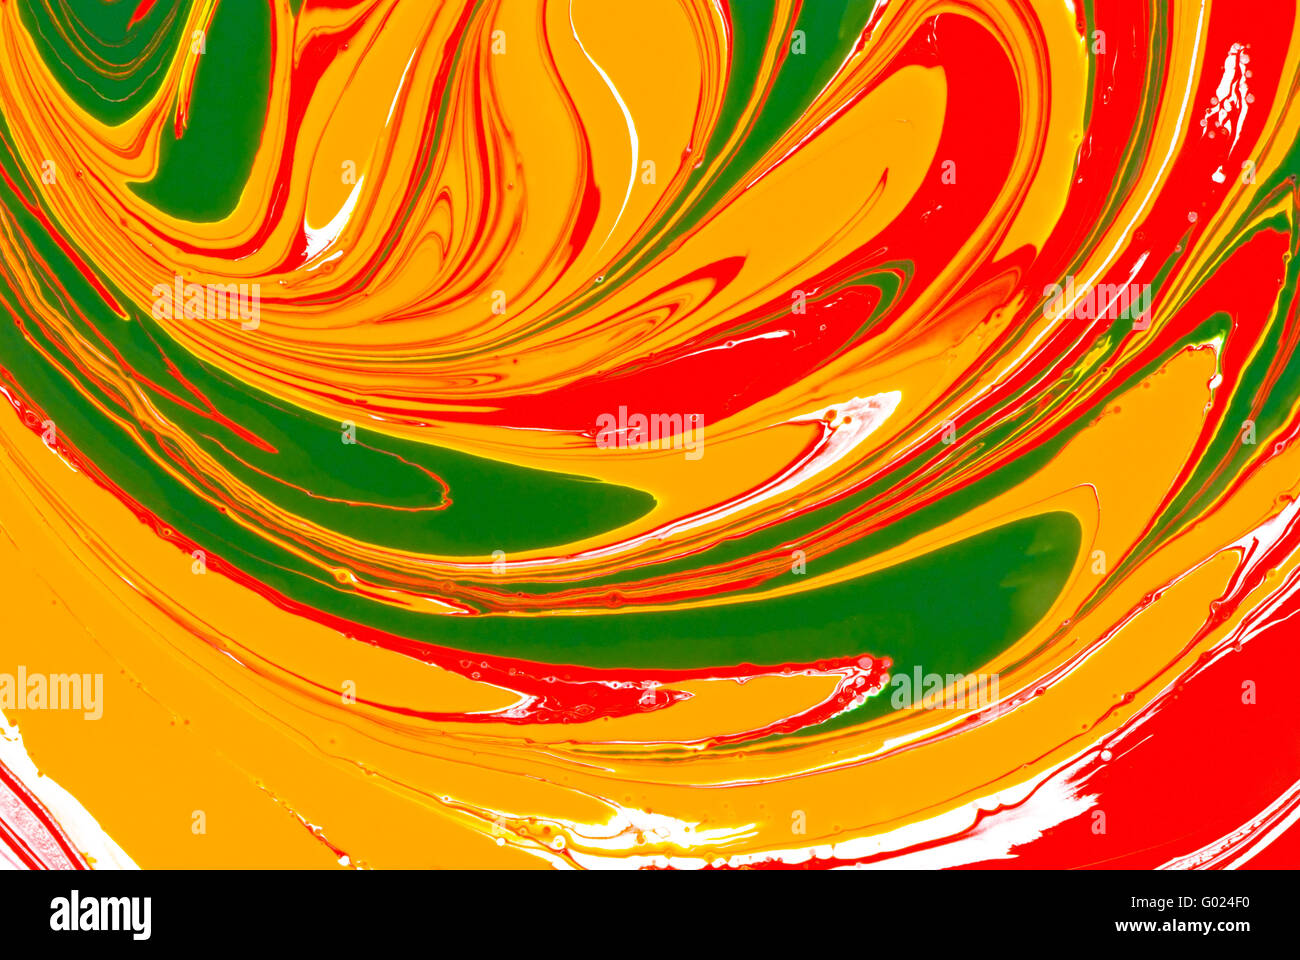 Red, yellow and green paints abstract background Stock Photo